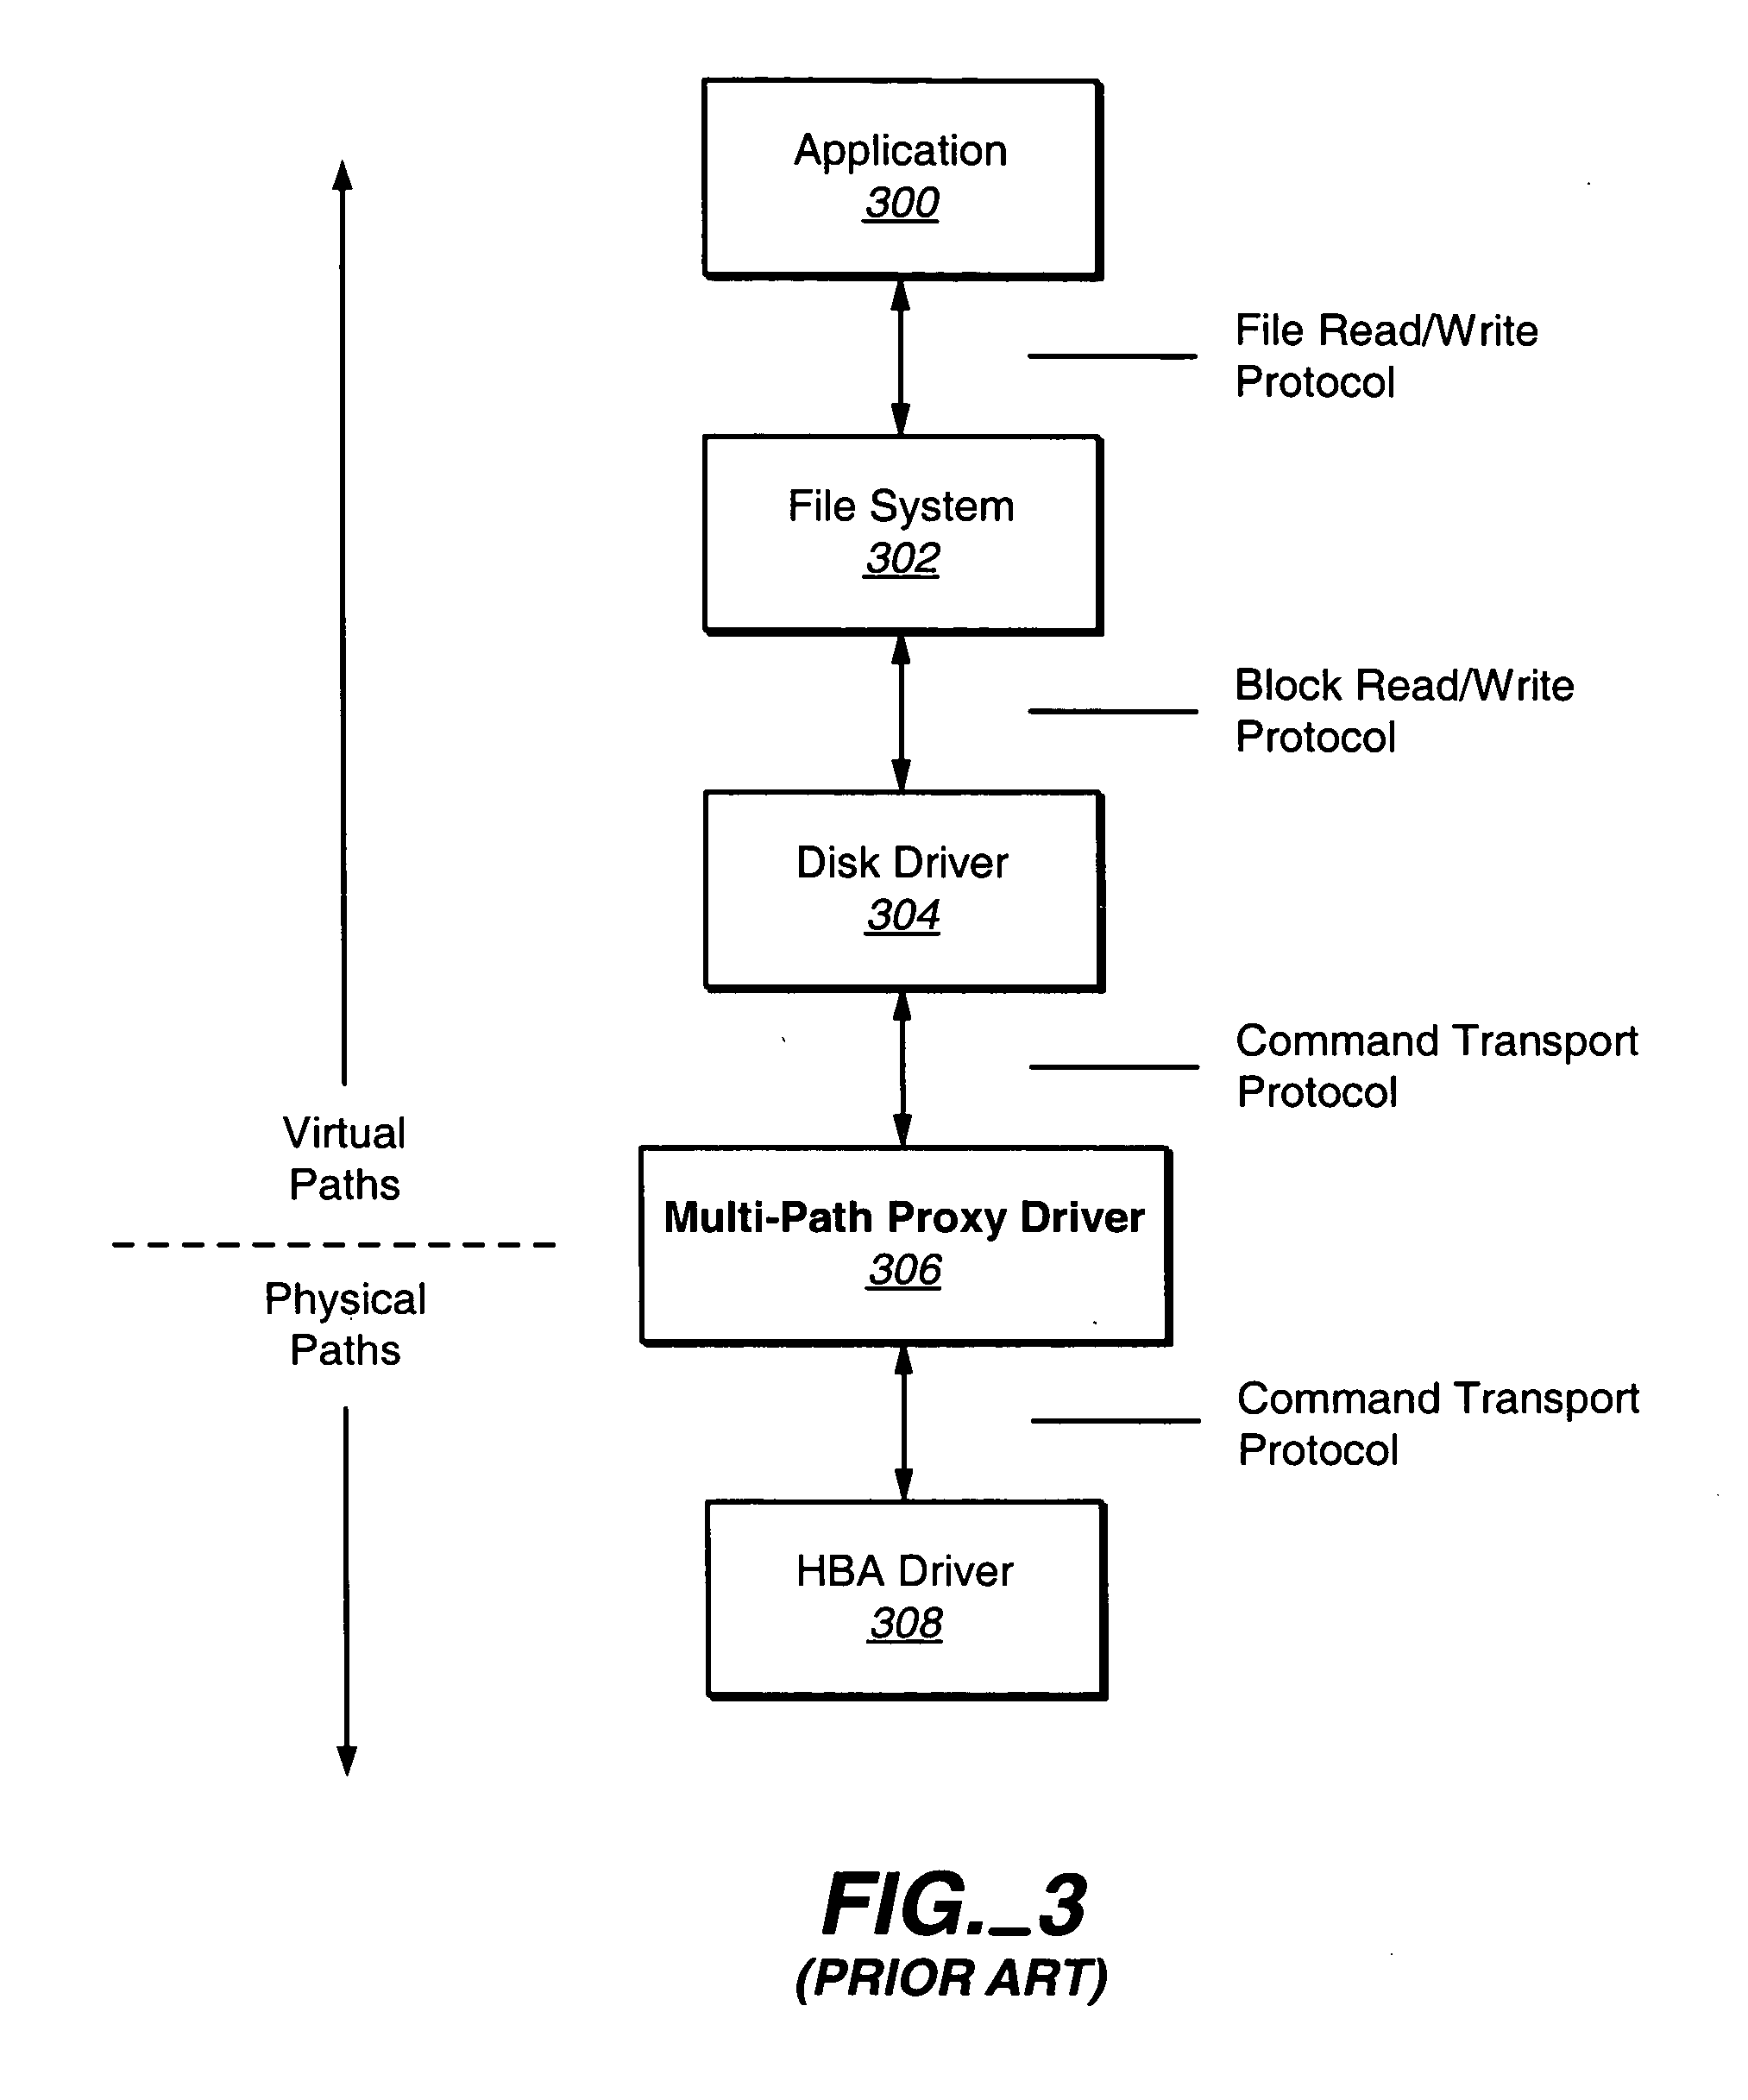 Methods and structure for supporting persistent reservations in a multiple-path storage environment